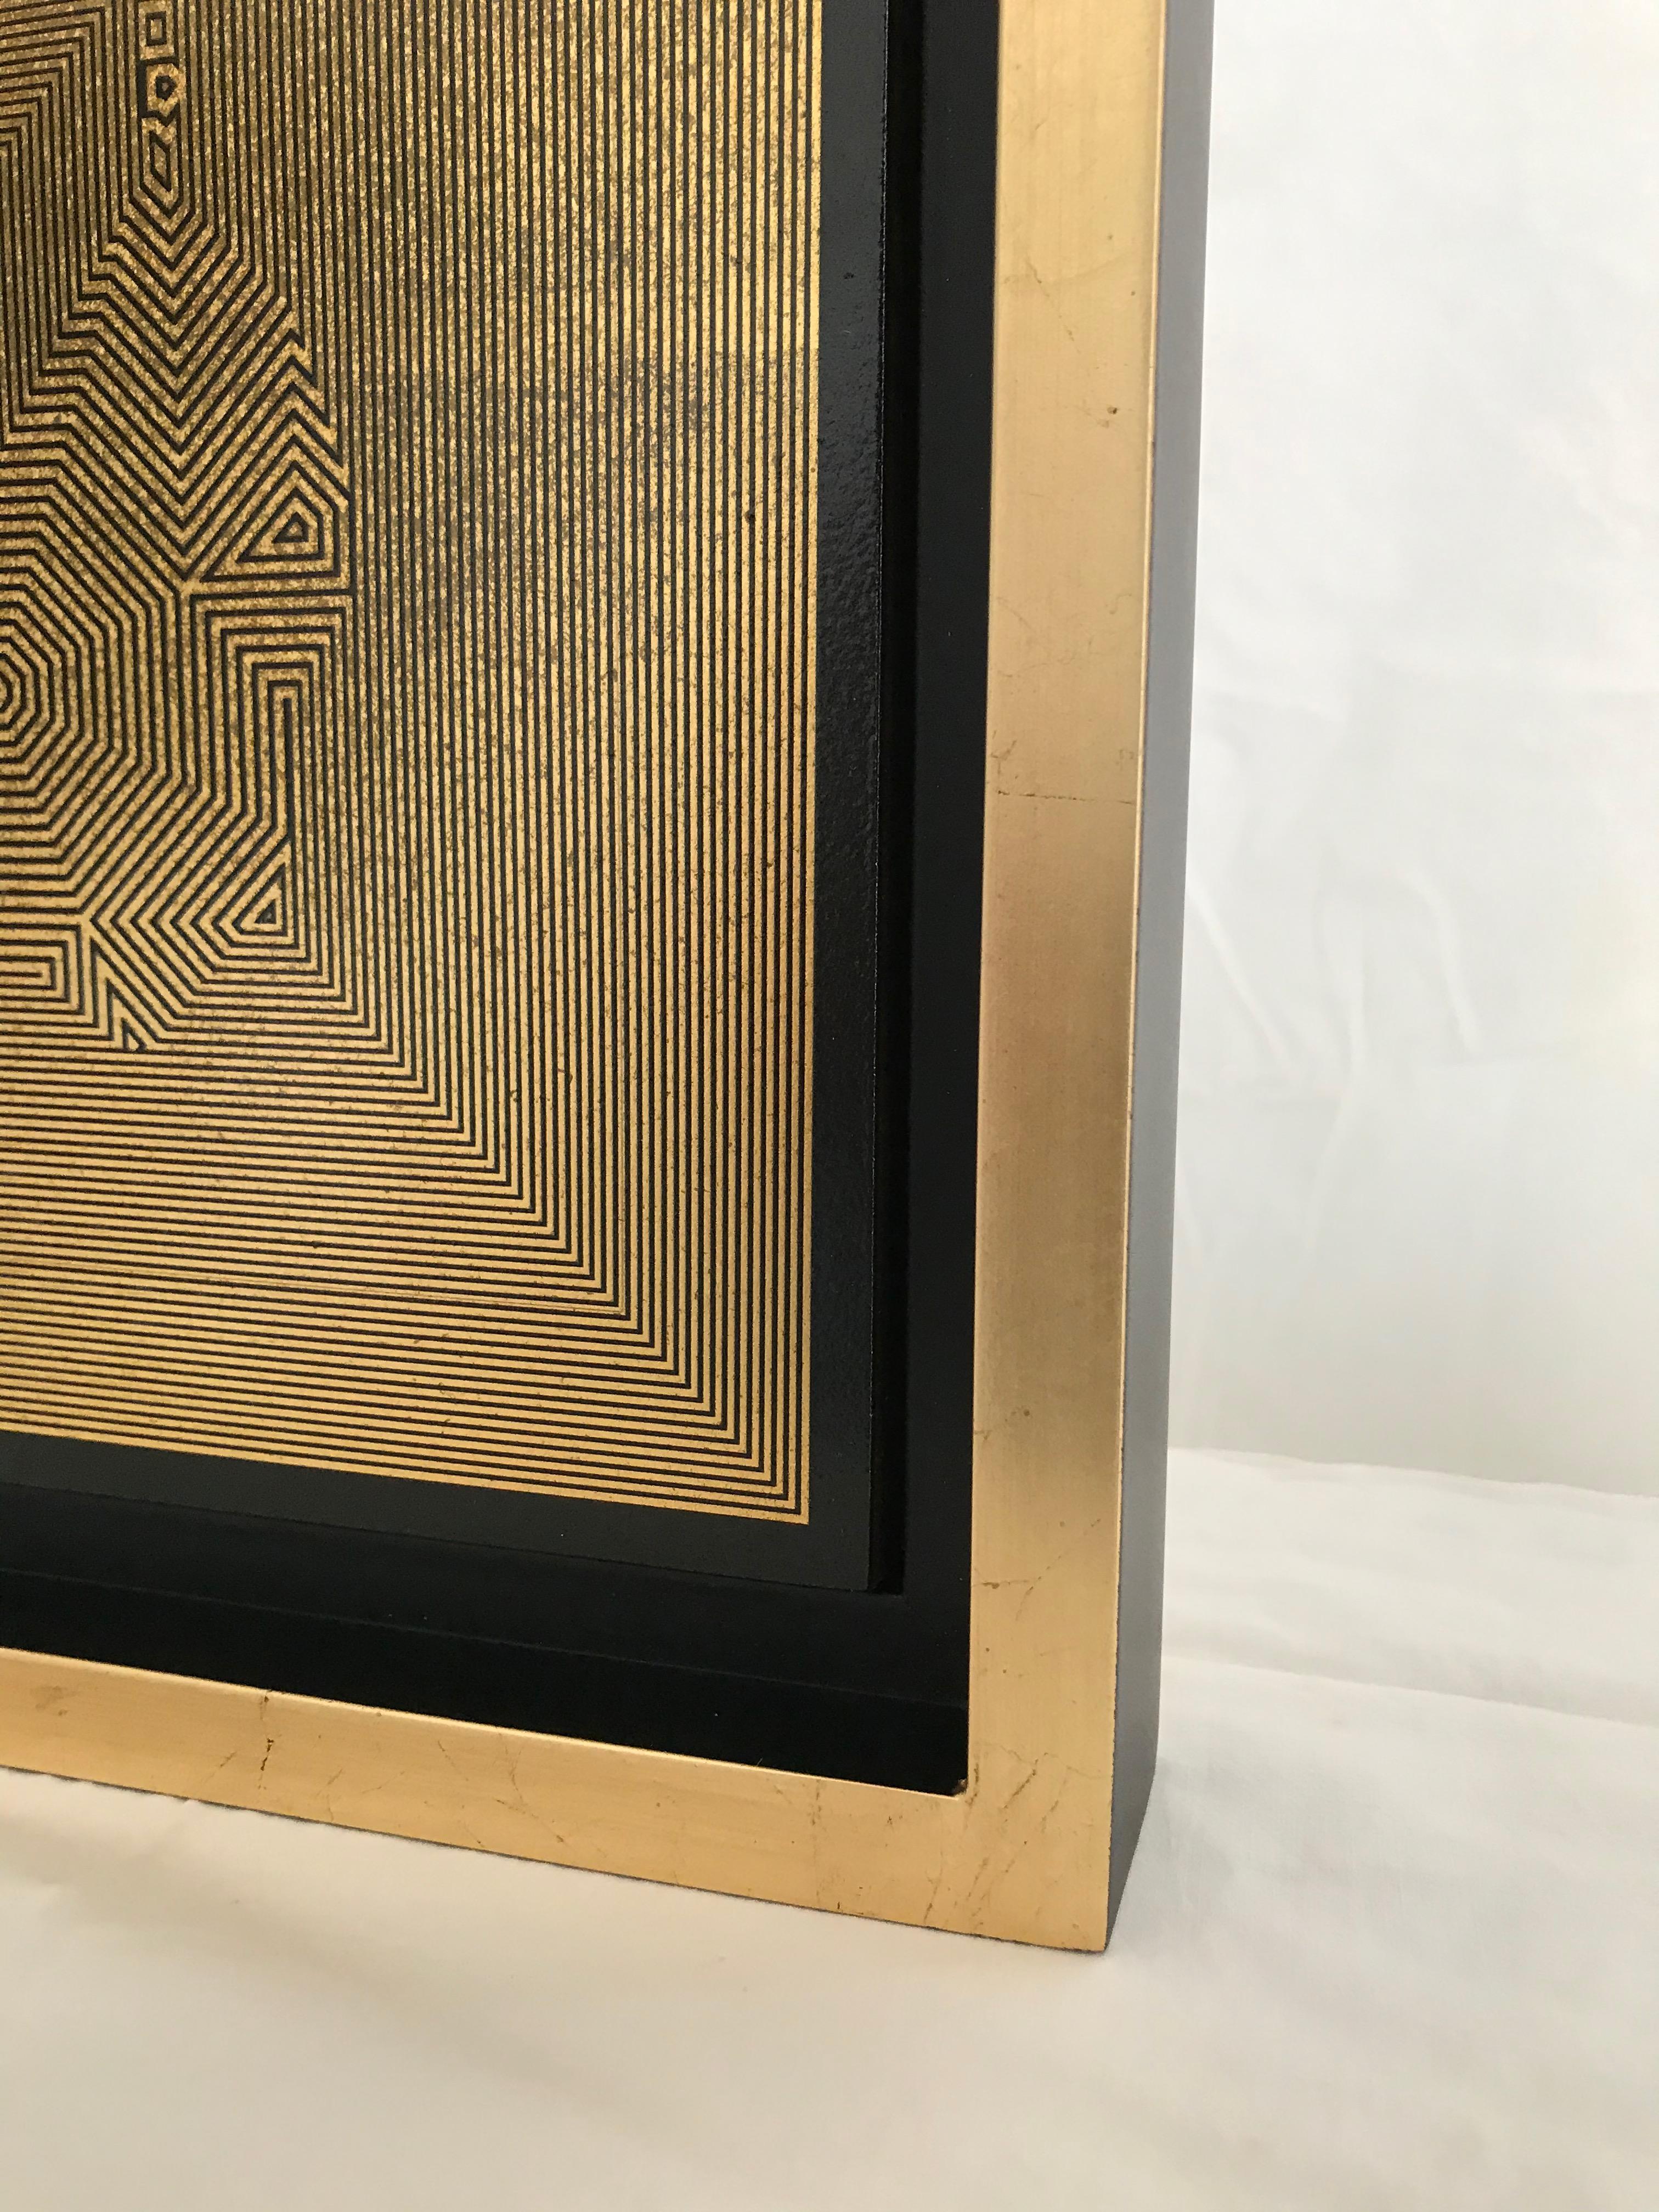 Untitled 23, 2019 by Francisco Larios
Lacquer, Acrylic, oil, and gold leaf on MDF Deep
Image Size: 9.5 in. H x 9.5 in. W
Frame Size: 11.6 in. H x 11.6 in. W x 1.5 in. D
One of a kind.
 
  From the  Mexican Ryōan-ji Series.
Ryōan-ji is the Japanese